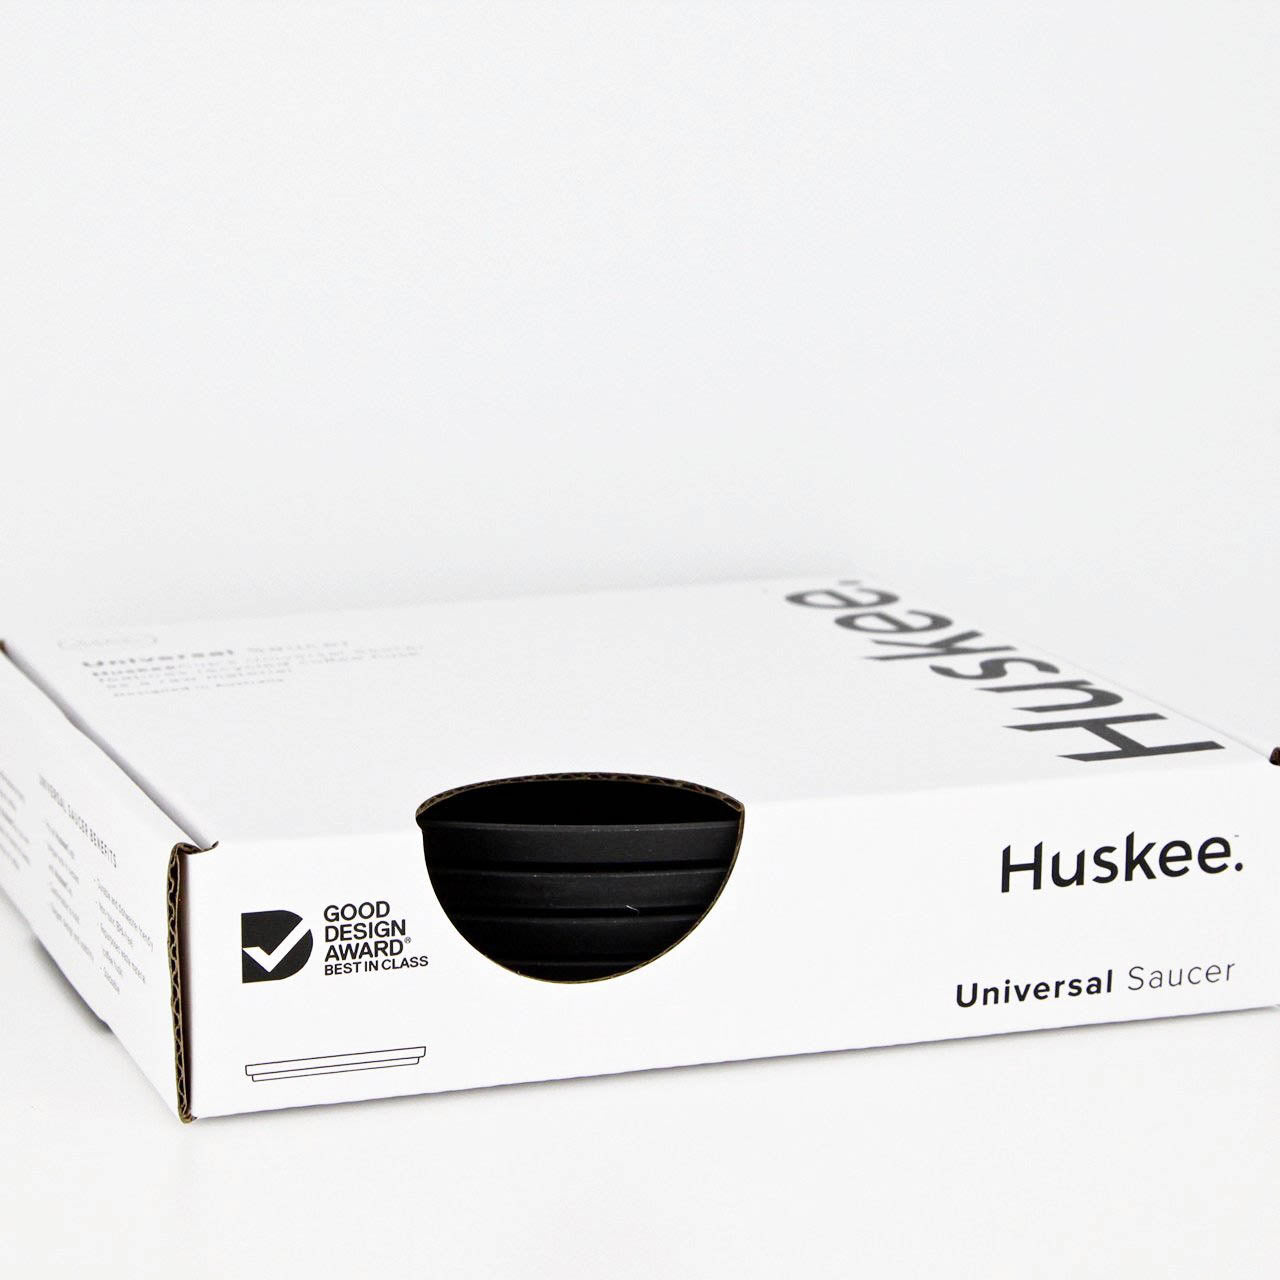 Huskee 4 Pack Universal Saucer Eco-Friendly Non-Toxic for Huskee Cups (Charcoal/Natural)